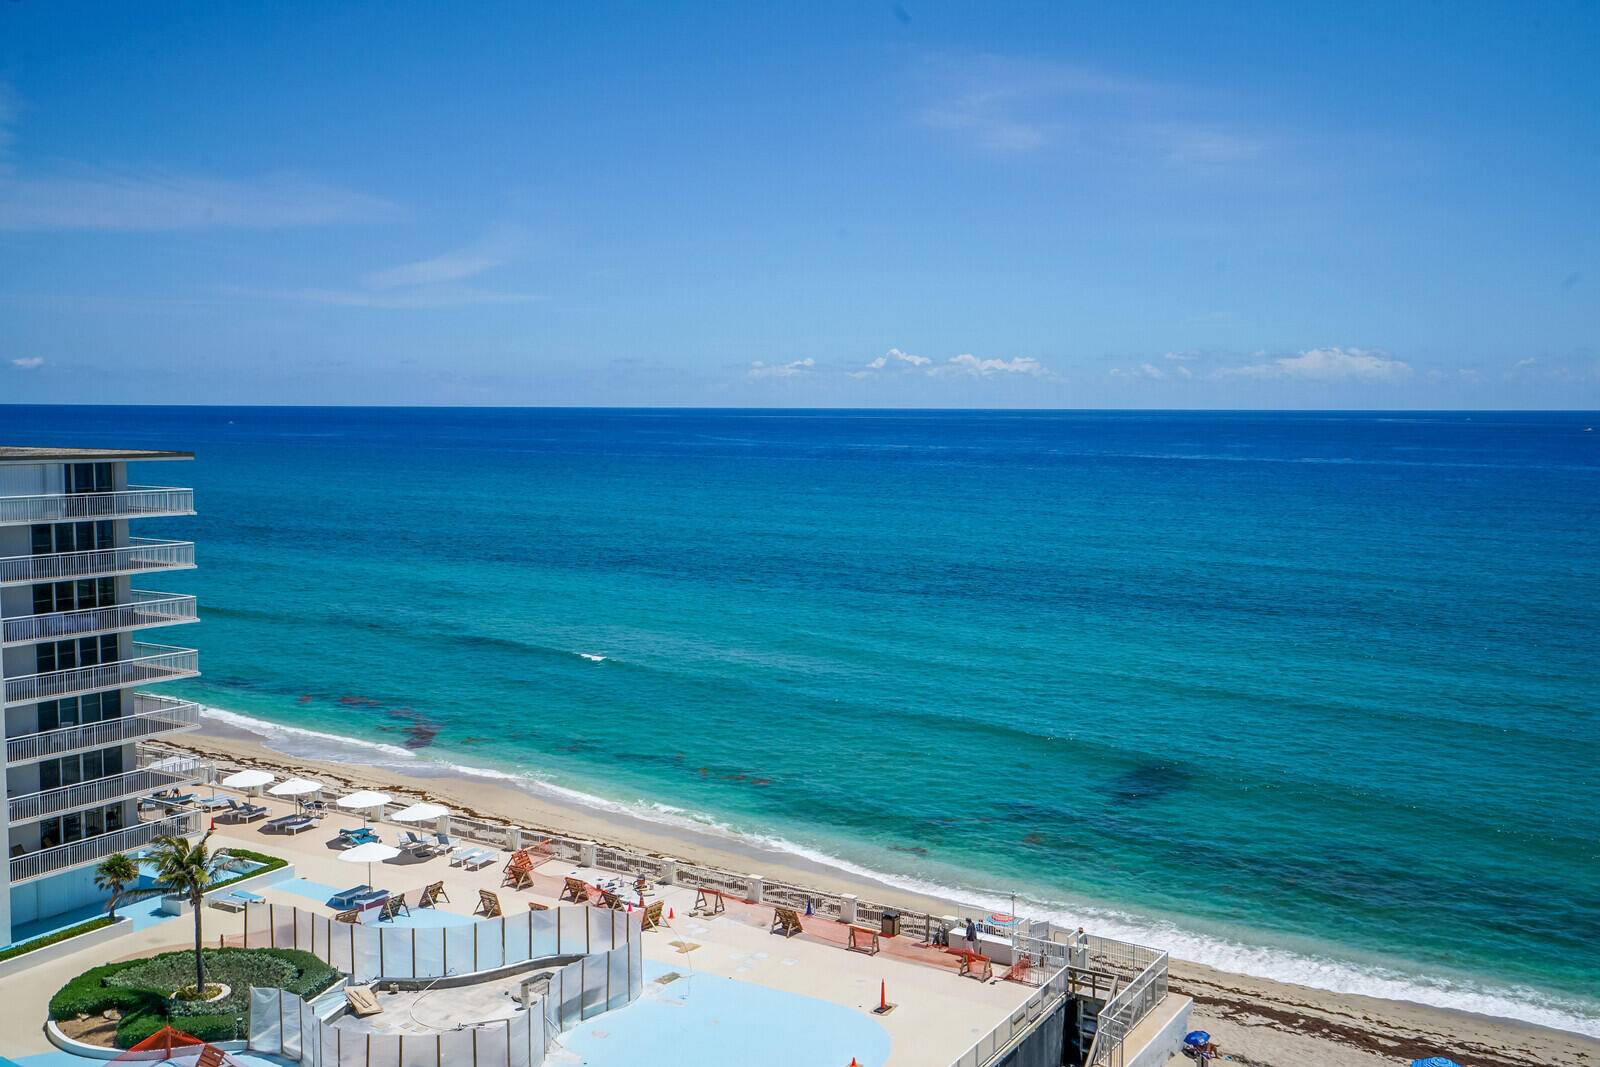 OCEAN VIEWS from every window, this vacation PENTHOUSE rental located on the sand offers idyllic, breathtaking ocean views, coastal contemporary finishes, covered parking, with amenities such as a gym, pool ...